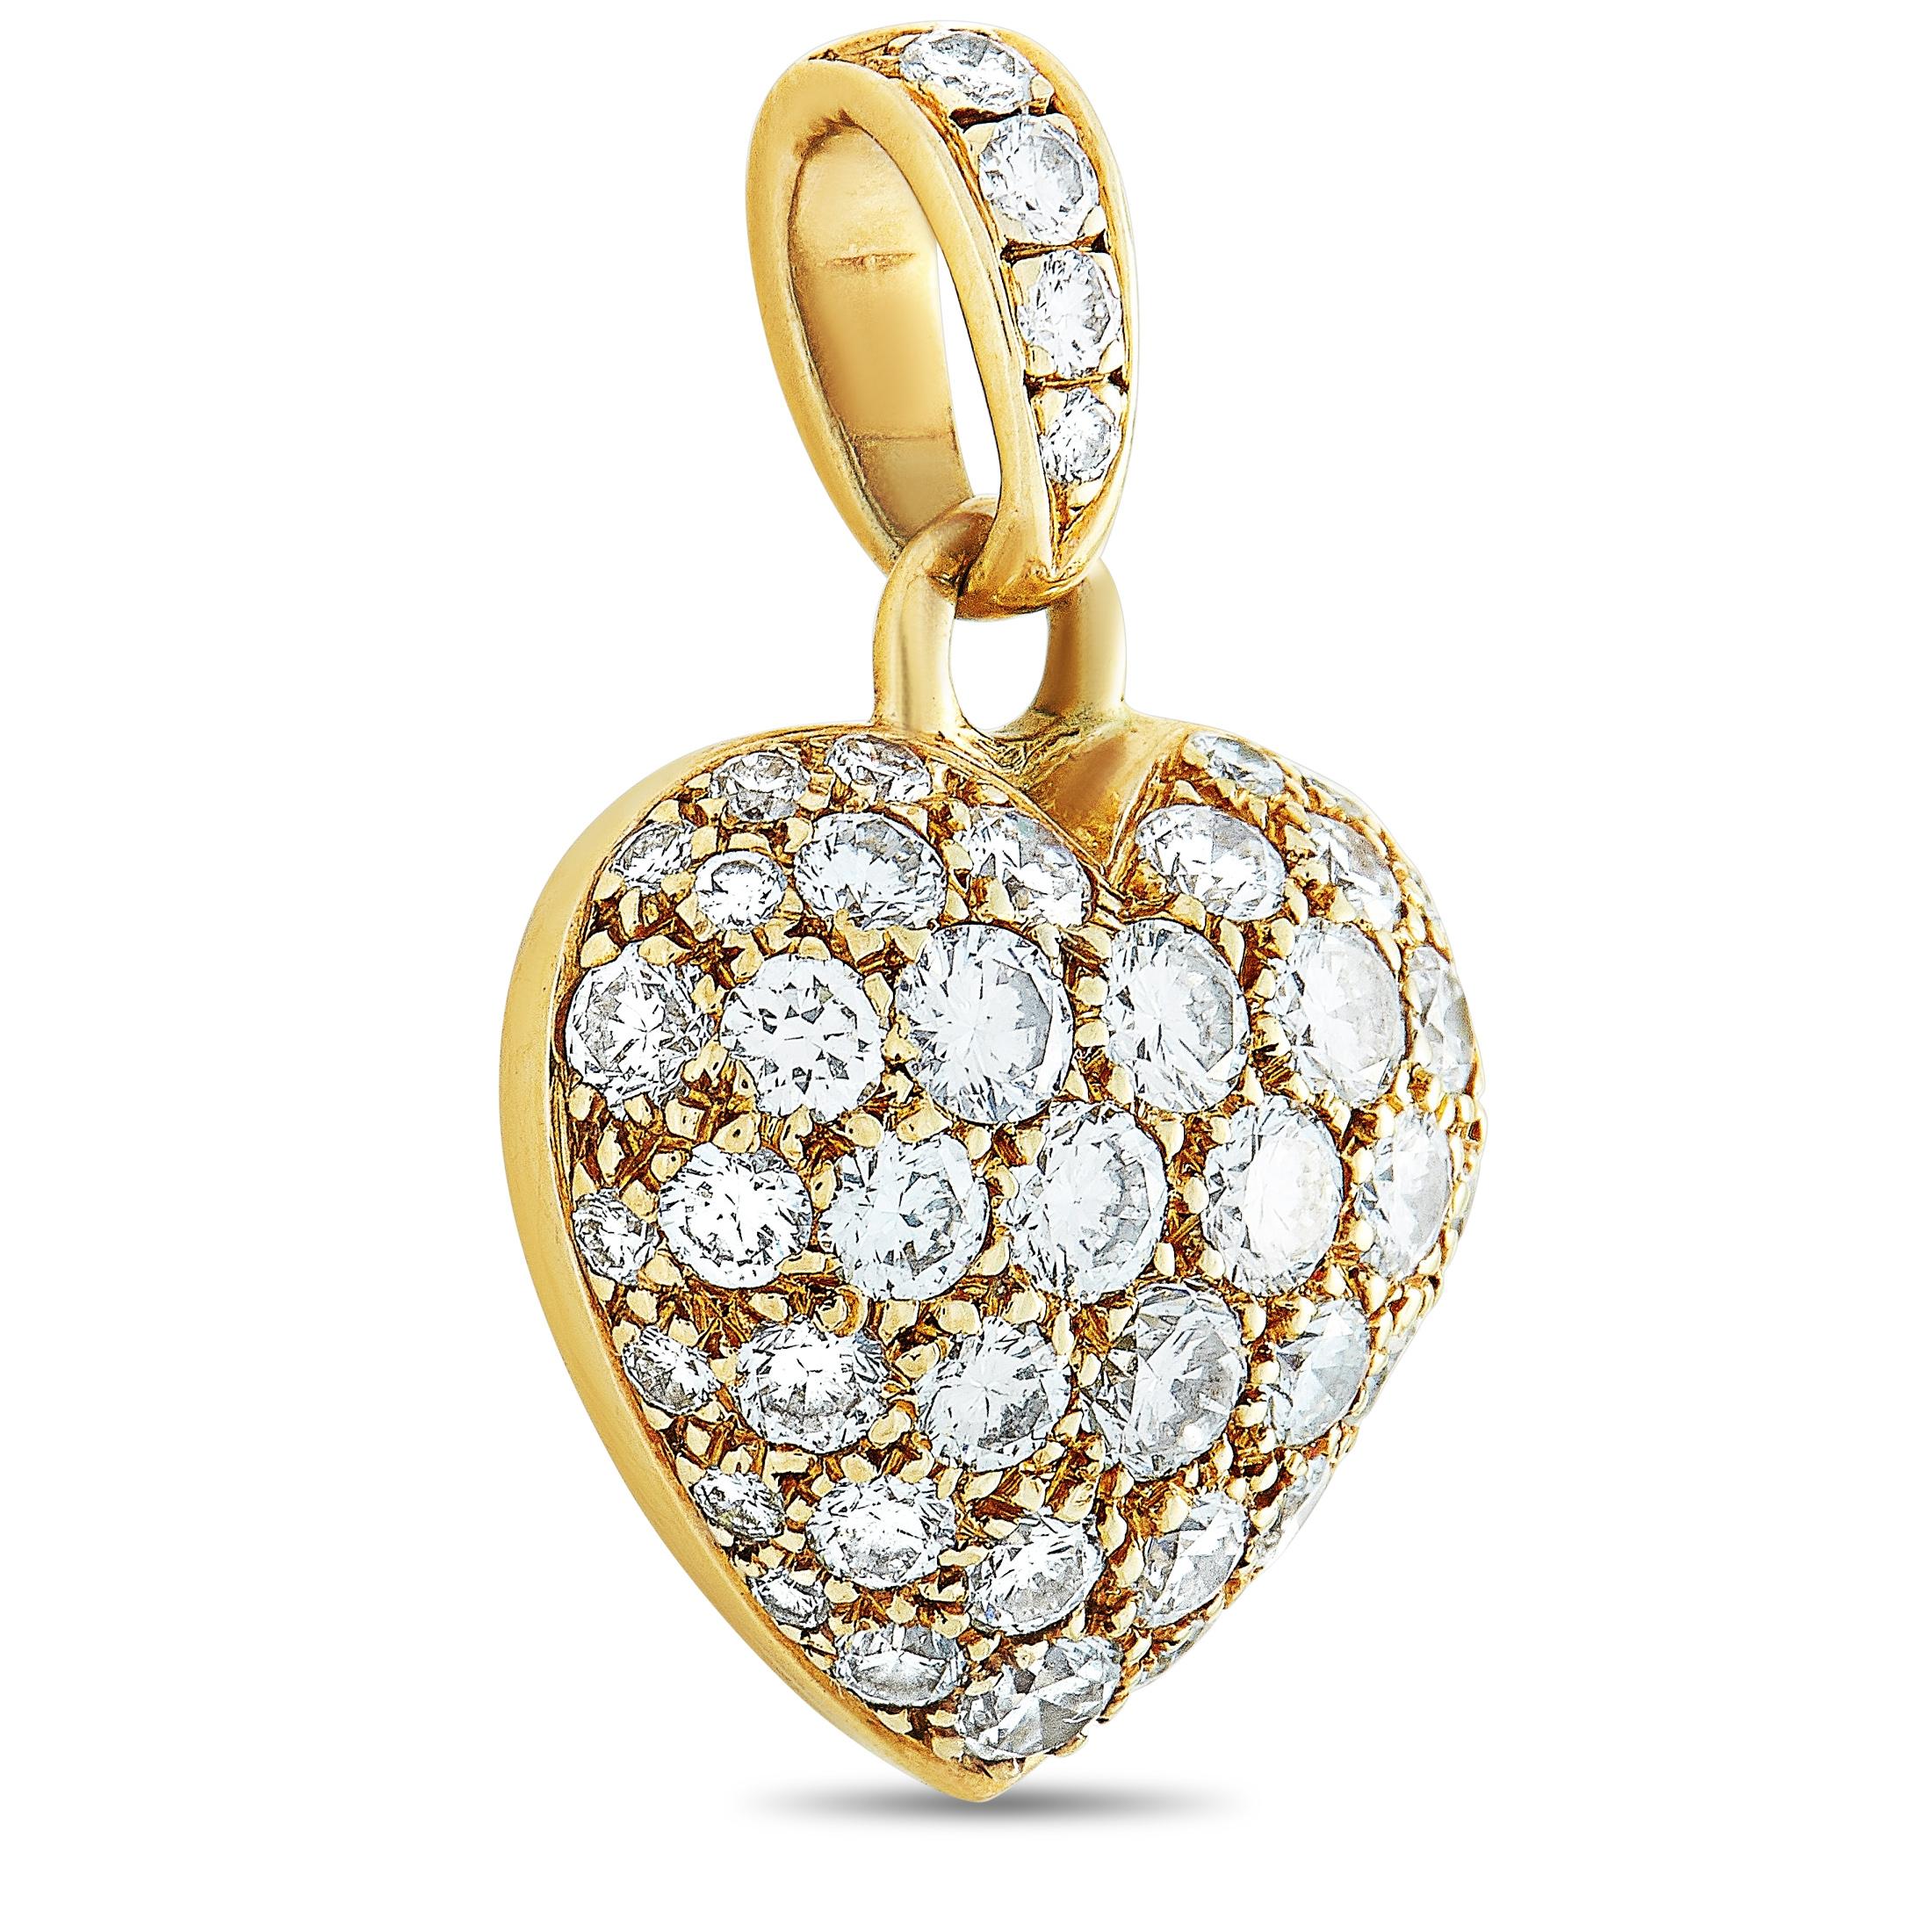 This Cartier heart pendant is made of 18K yellow gold and weighs 3.1 grams, measuring 0.80” in length and 0.50” in width. The pendant is set with diamonds that boast grade F color and VS1 clarity and amount to 1.30 carats.
 
 Offered in estate